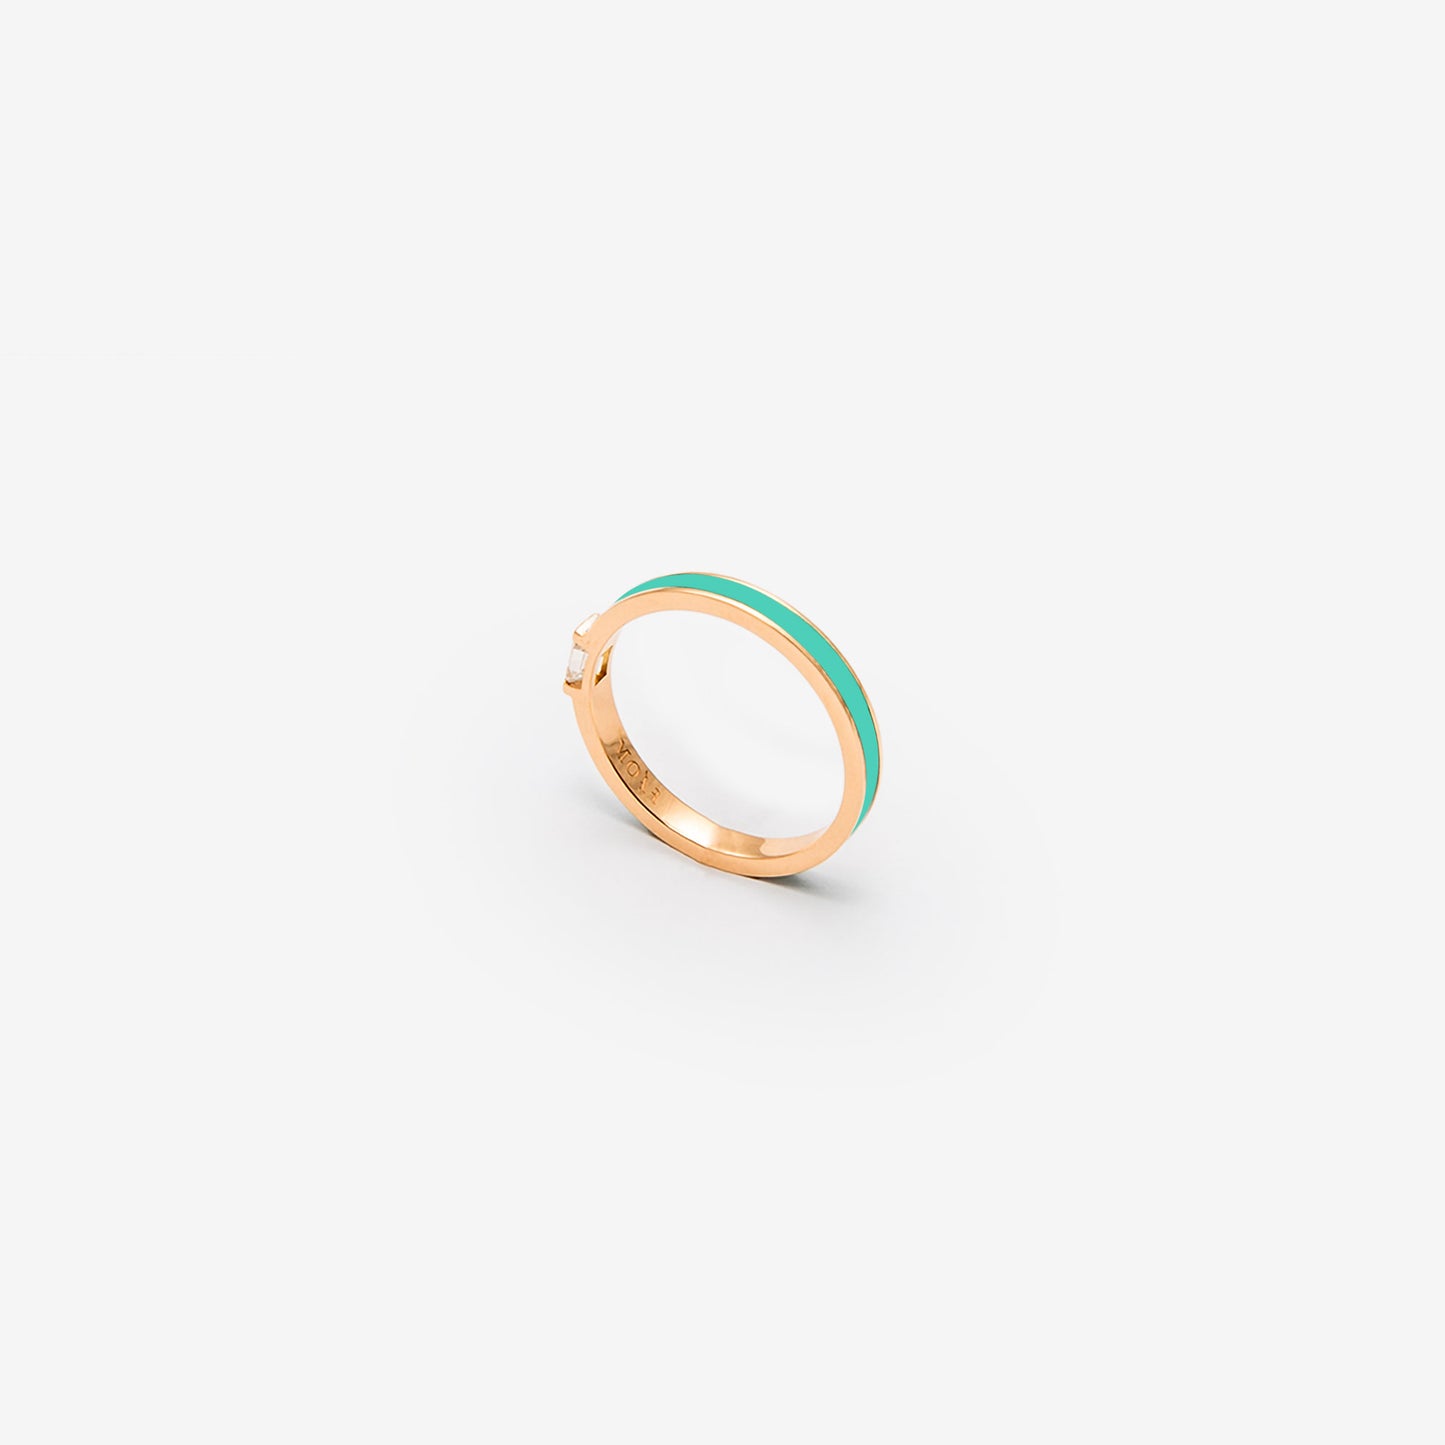 Rose gold band with turquoise enamel and a diamond